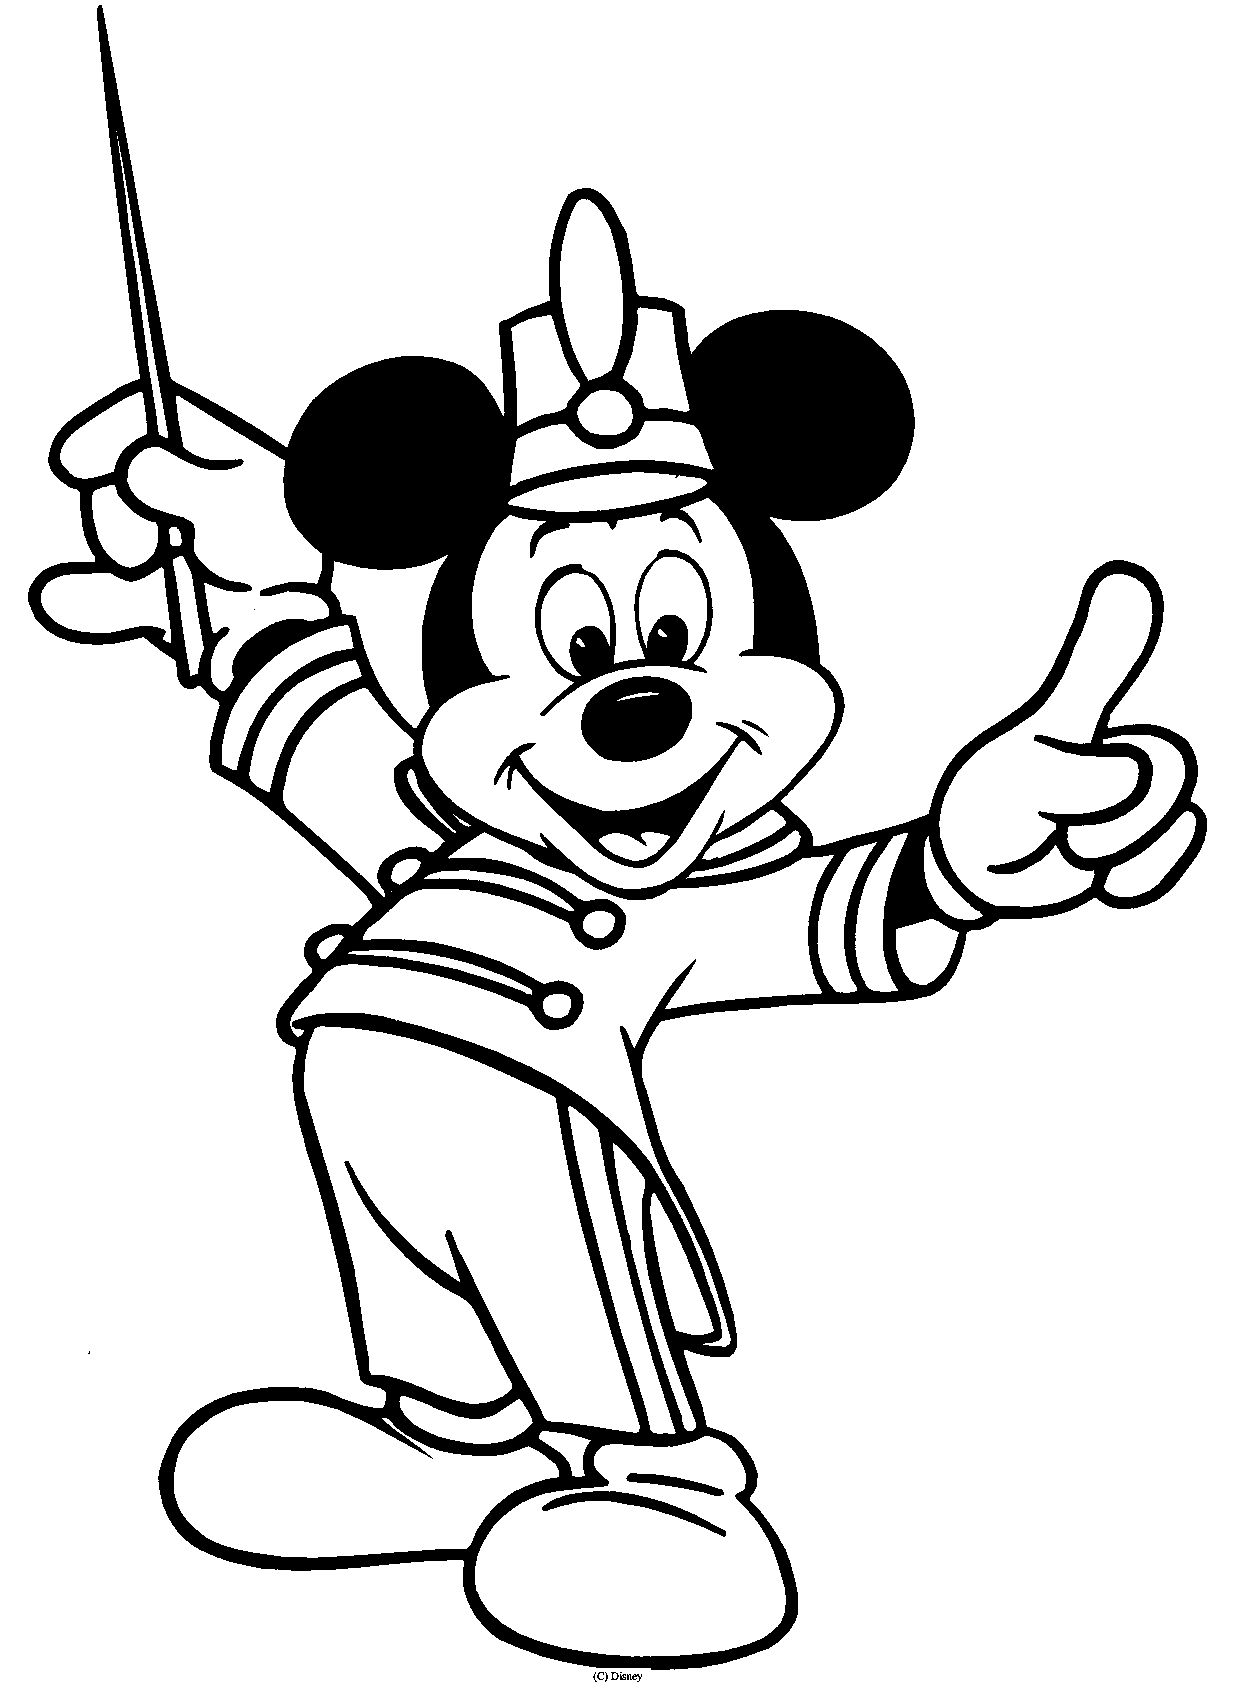 Baby mickey mouse clipart black and white free - Clipartix